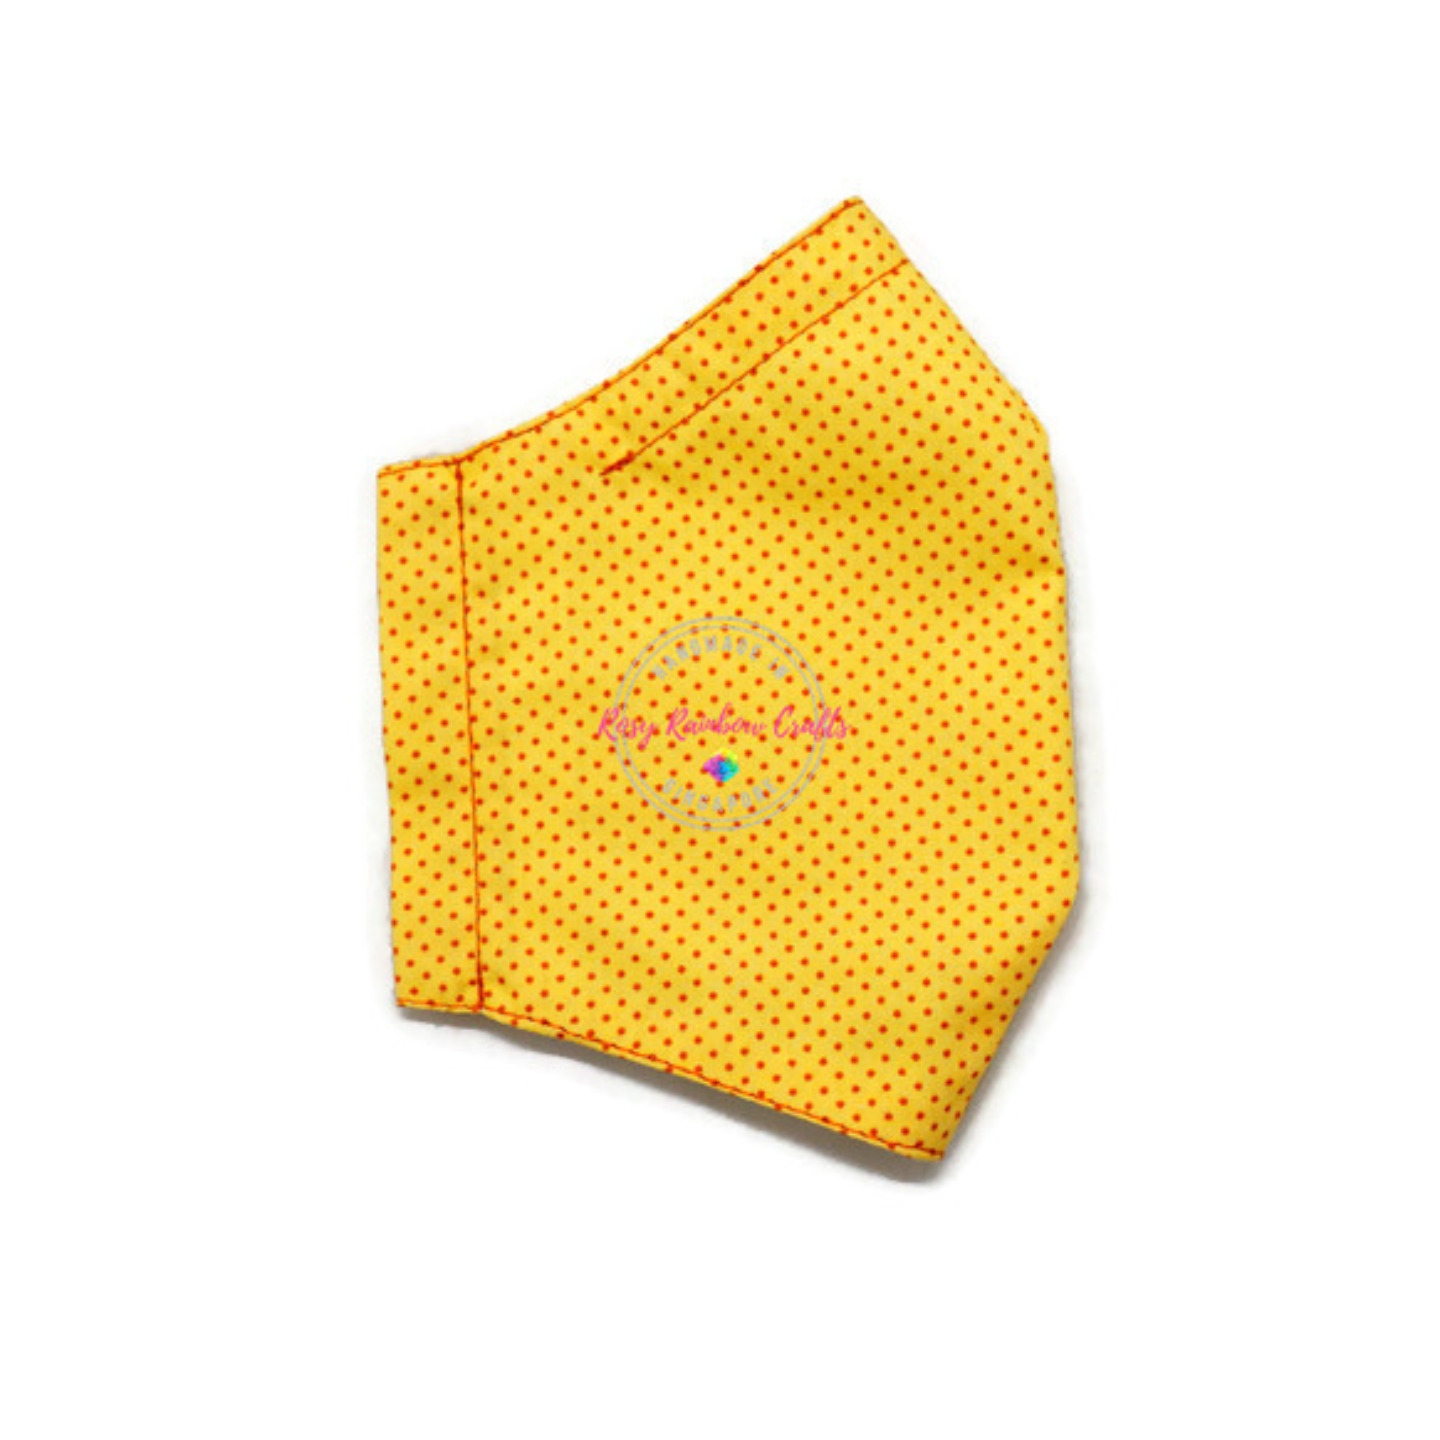 3D Seamless Mask Candy Yellow Dots Medium 8-12 years old